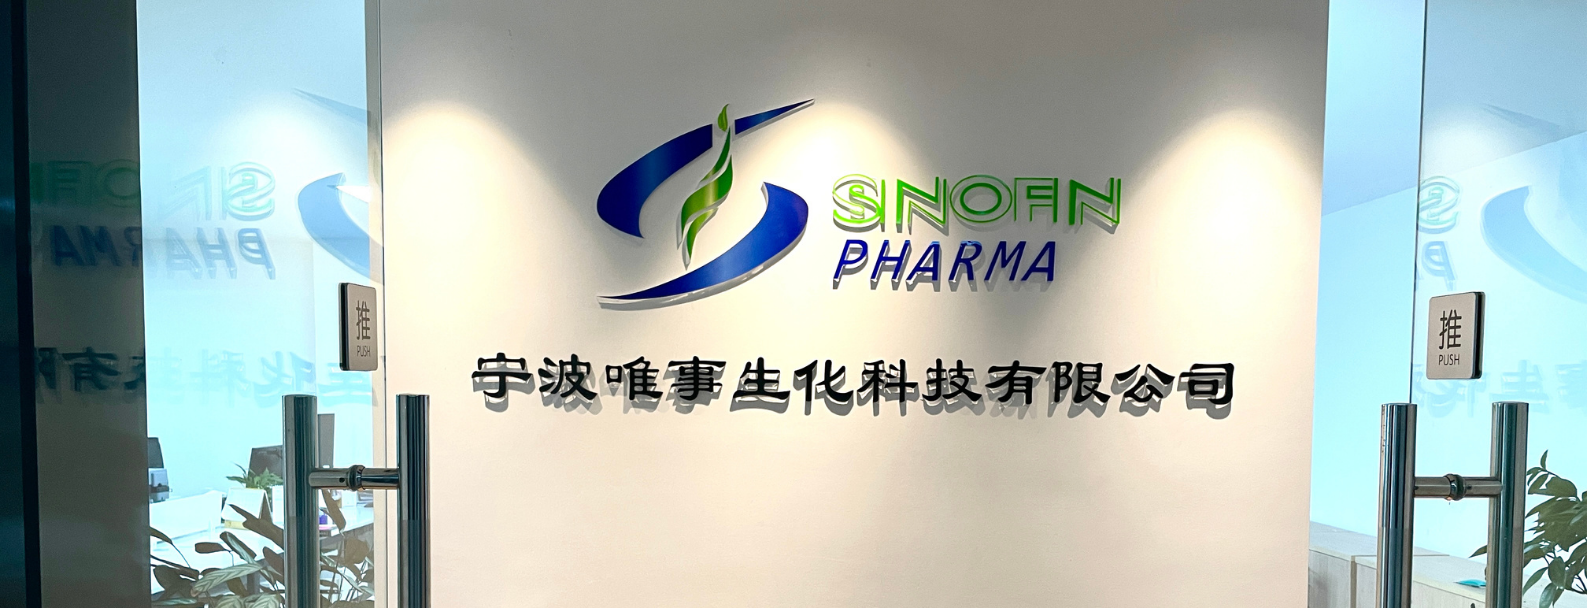 Each day is a brand-new opportunity for Sinofin Pharma